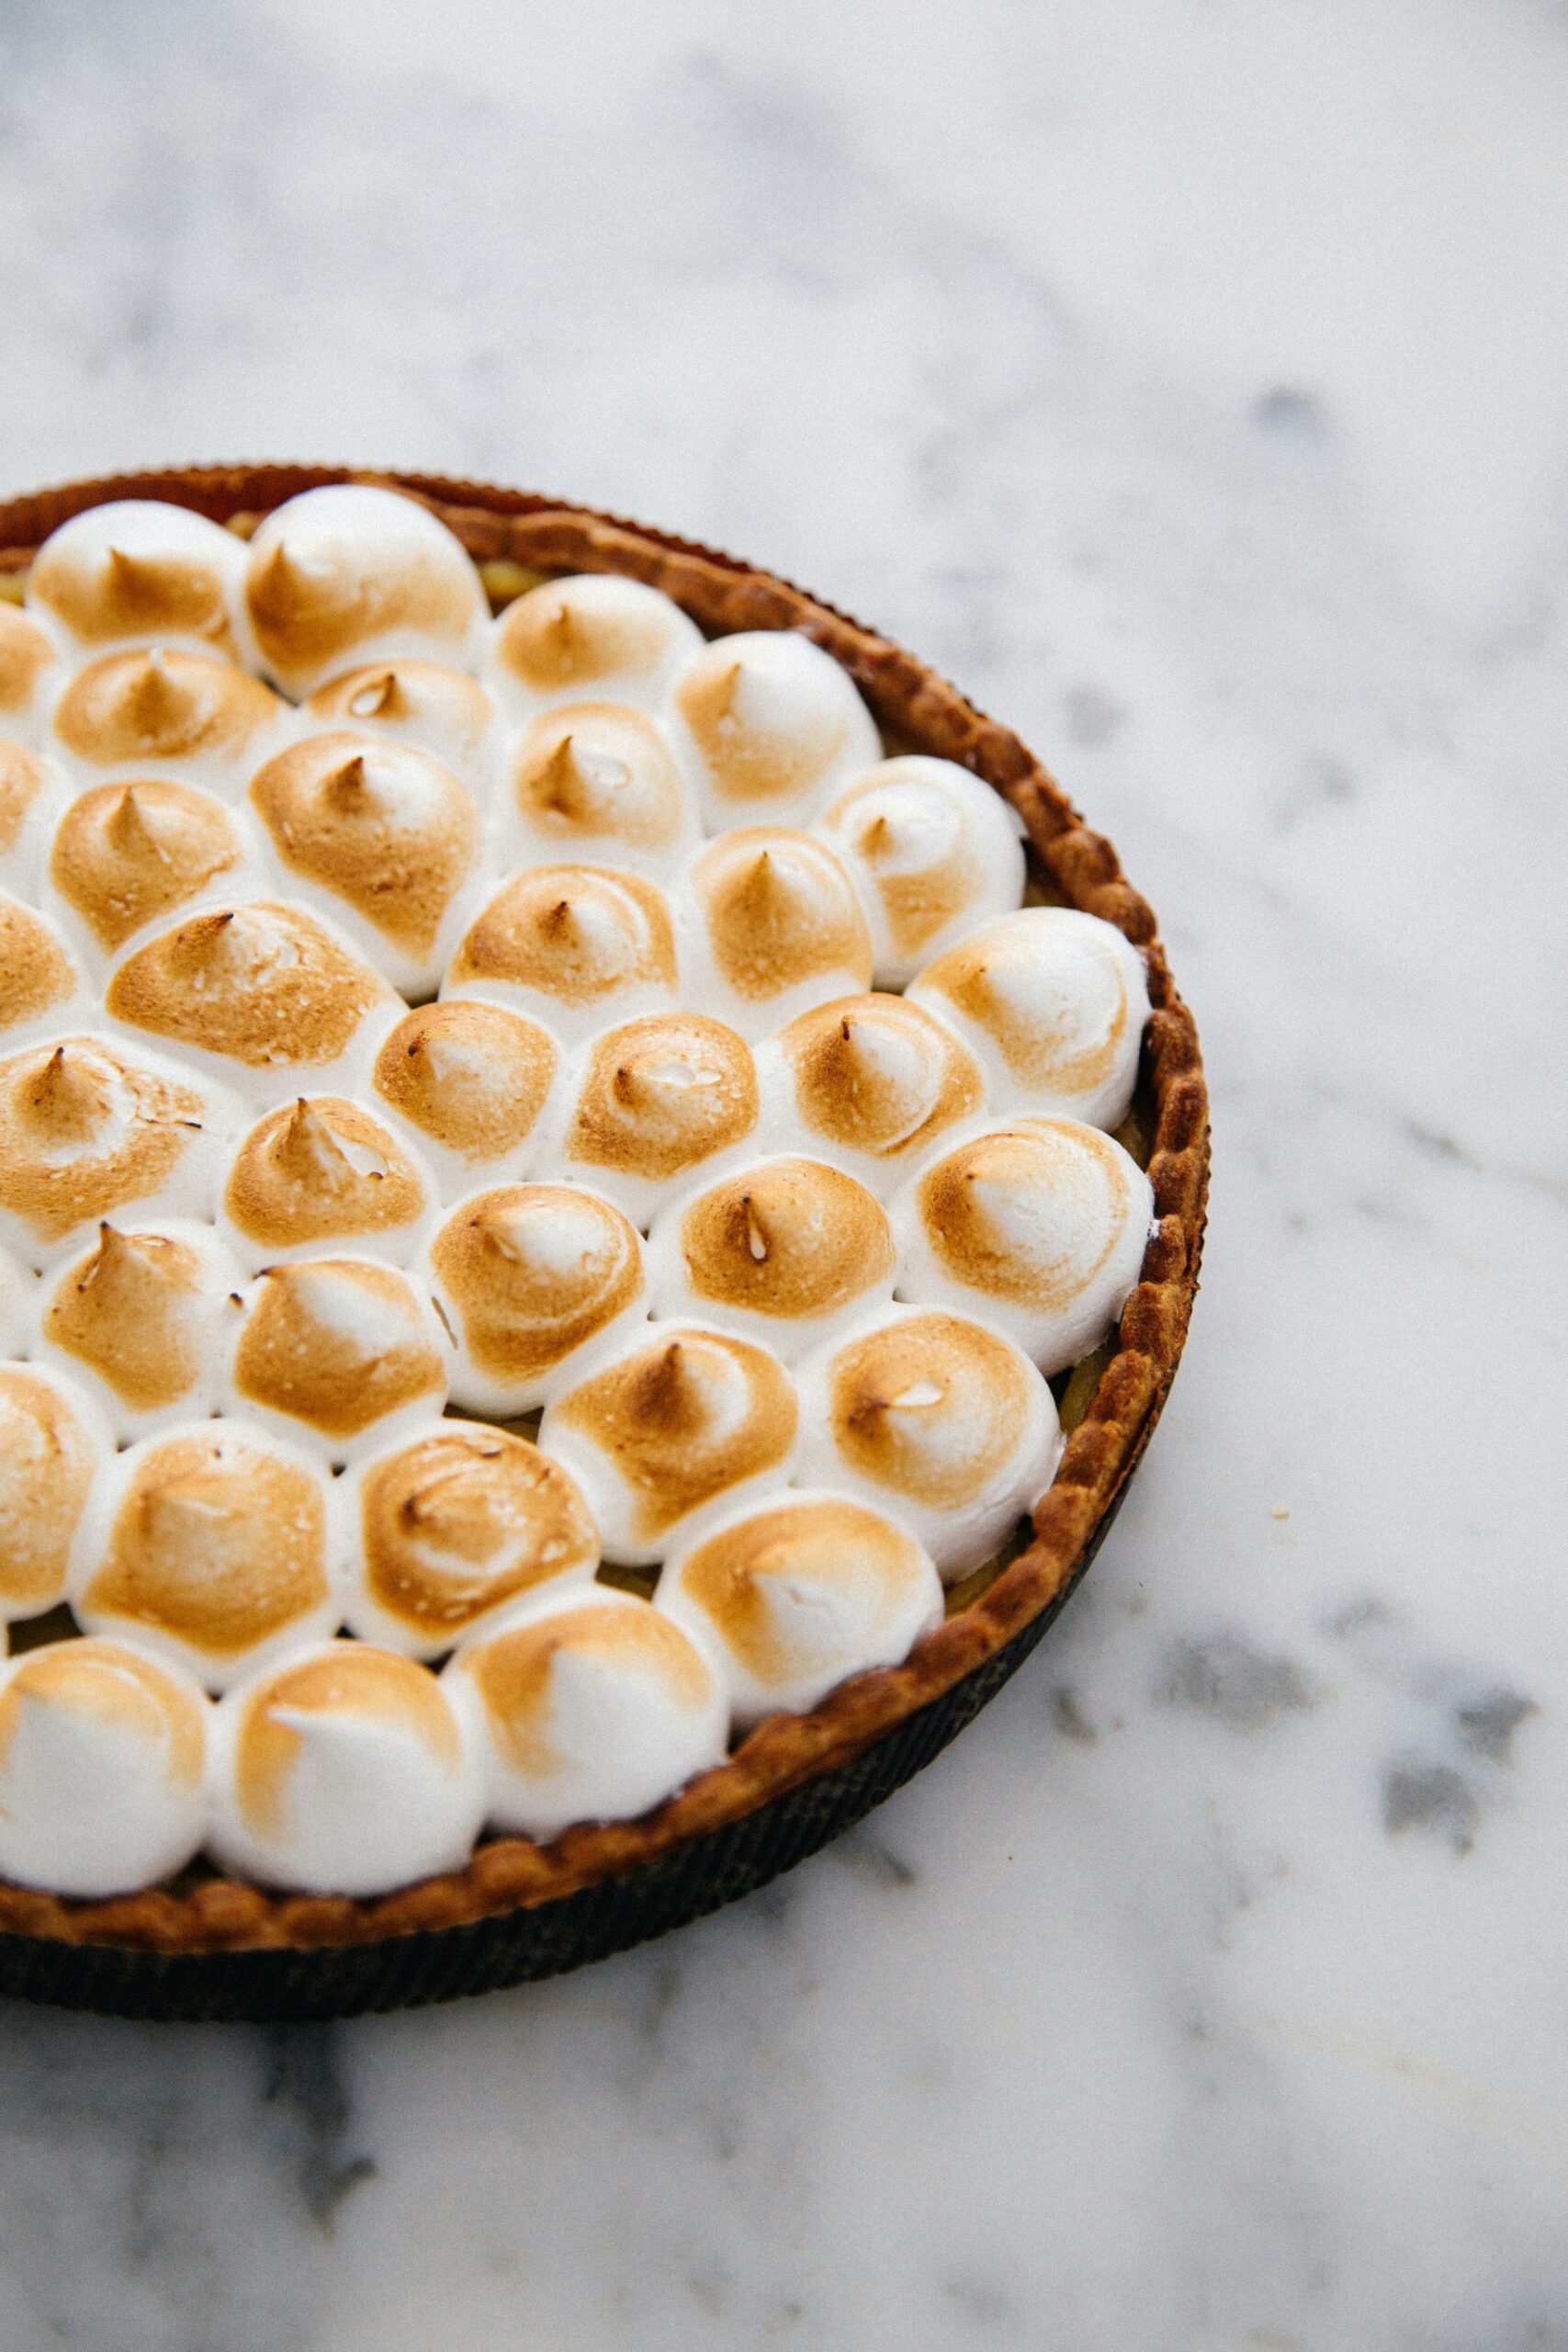 "What are some Easter desserts, a pie sitting on a marble counter top with a golden brown meringue topping"